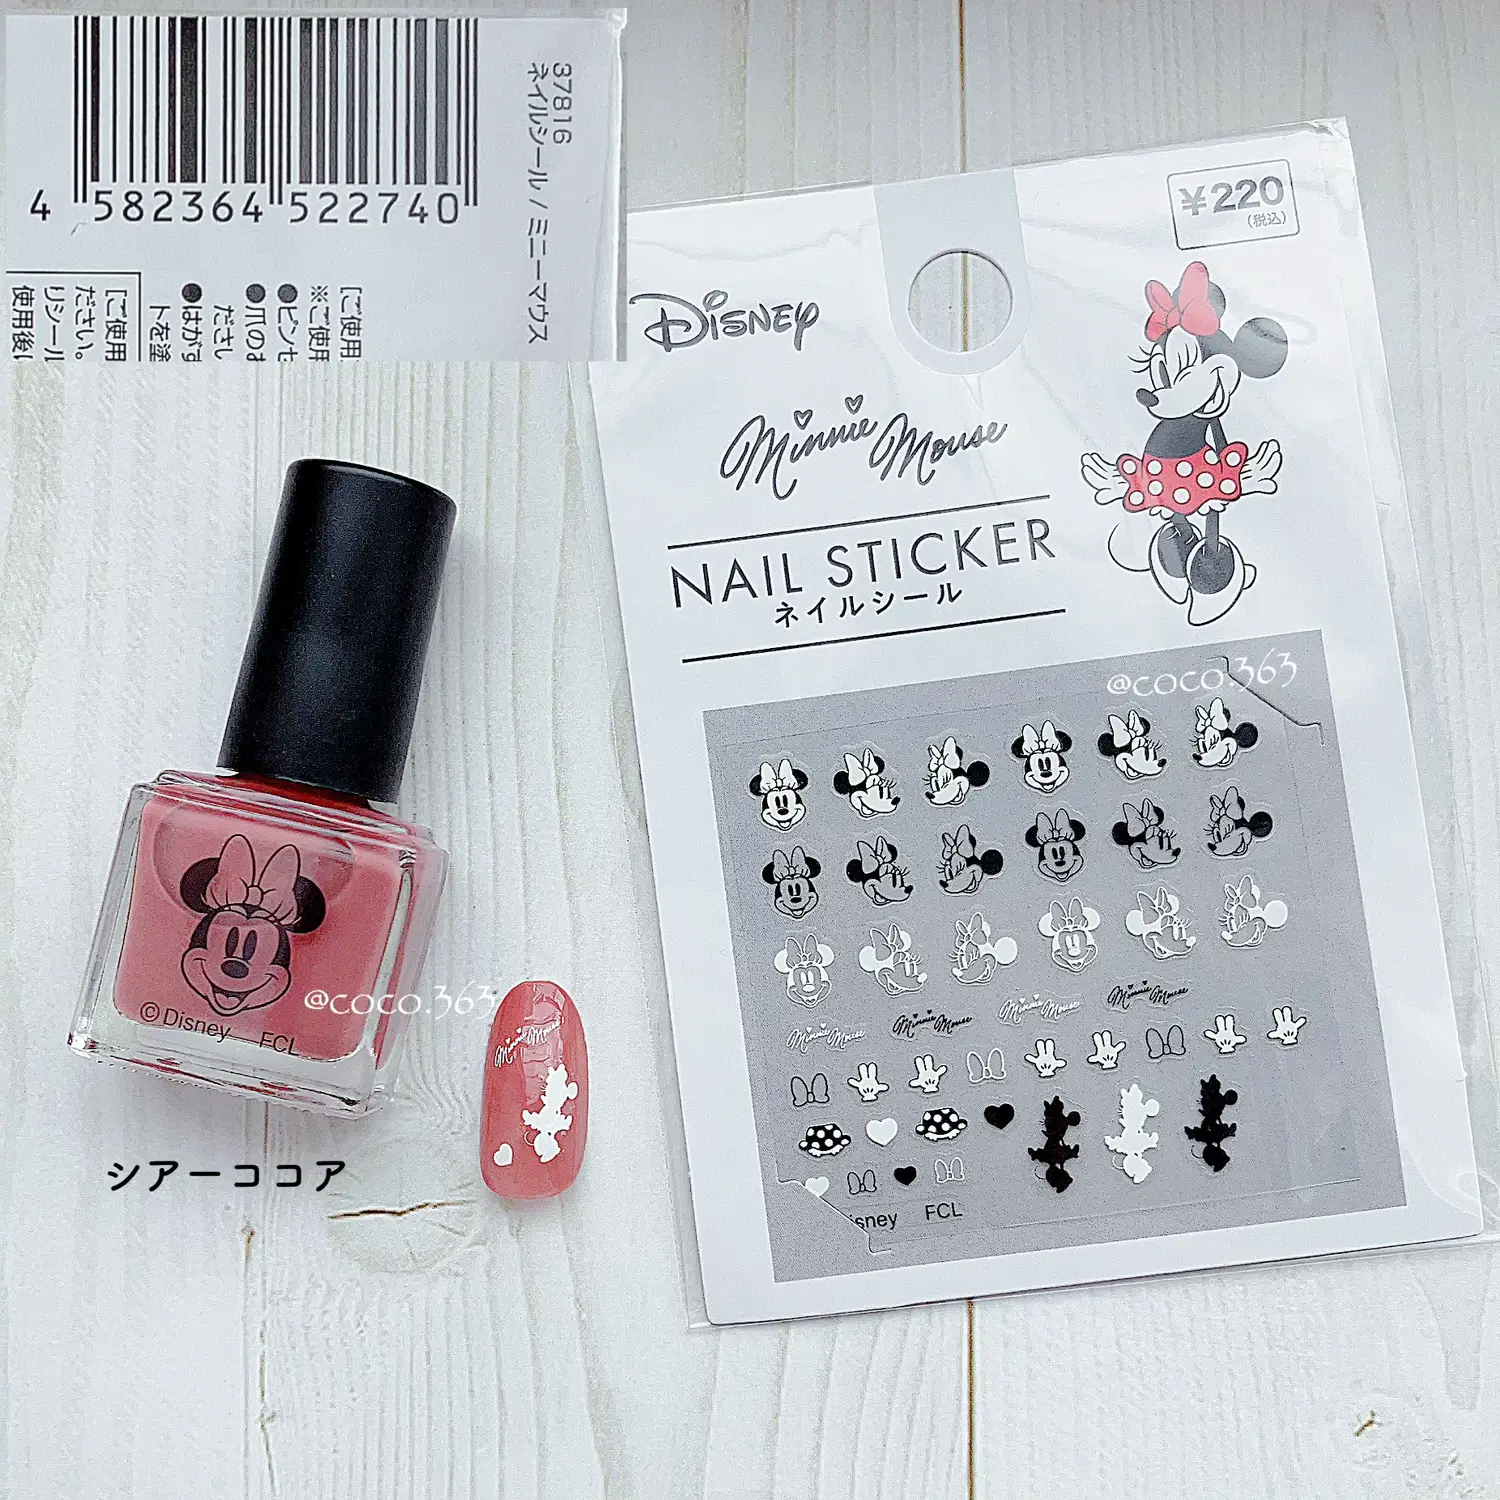 Even clumsy people can easily become cute 🙌🏻 Disney Nail Sticker 💅 For  toes that can be warm and cool ♡, Gallery posted by coco